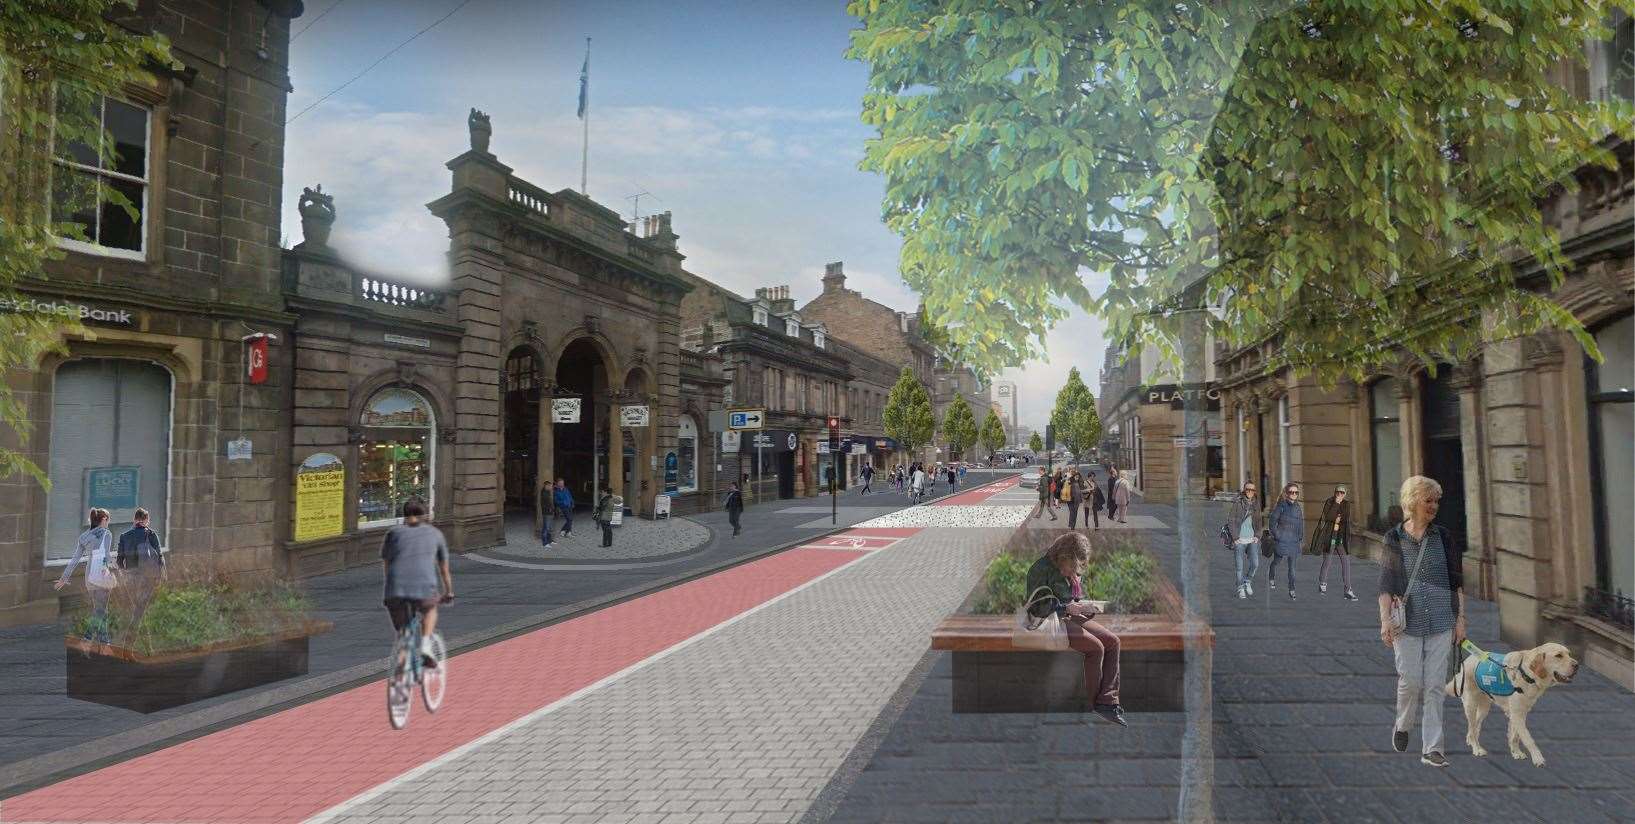 An artist’s impression of Academy Street proposals includes a cyclist.